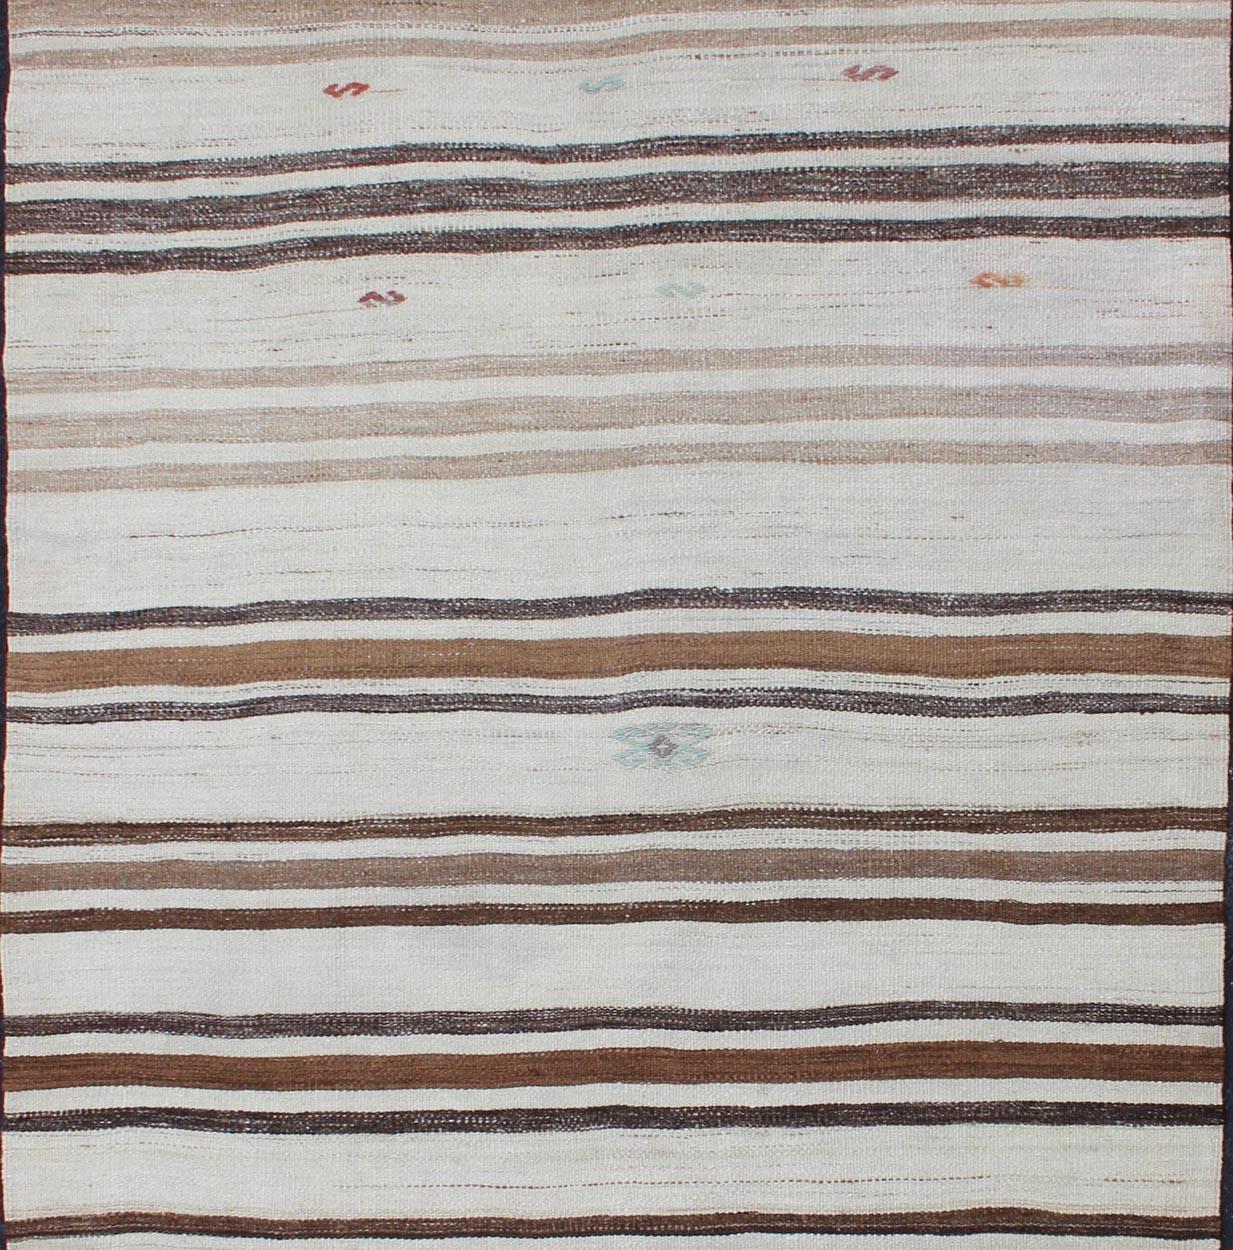 Striped Turkish Vintage Kilim Flat-Weave Rug in Shades of Browns Taupe and Ivory In Good Condition For Sale In Atlanta, GA